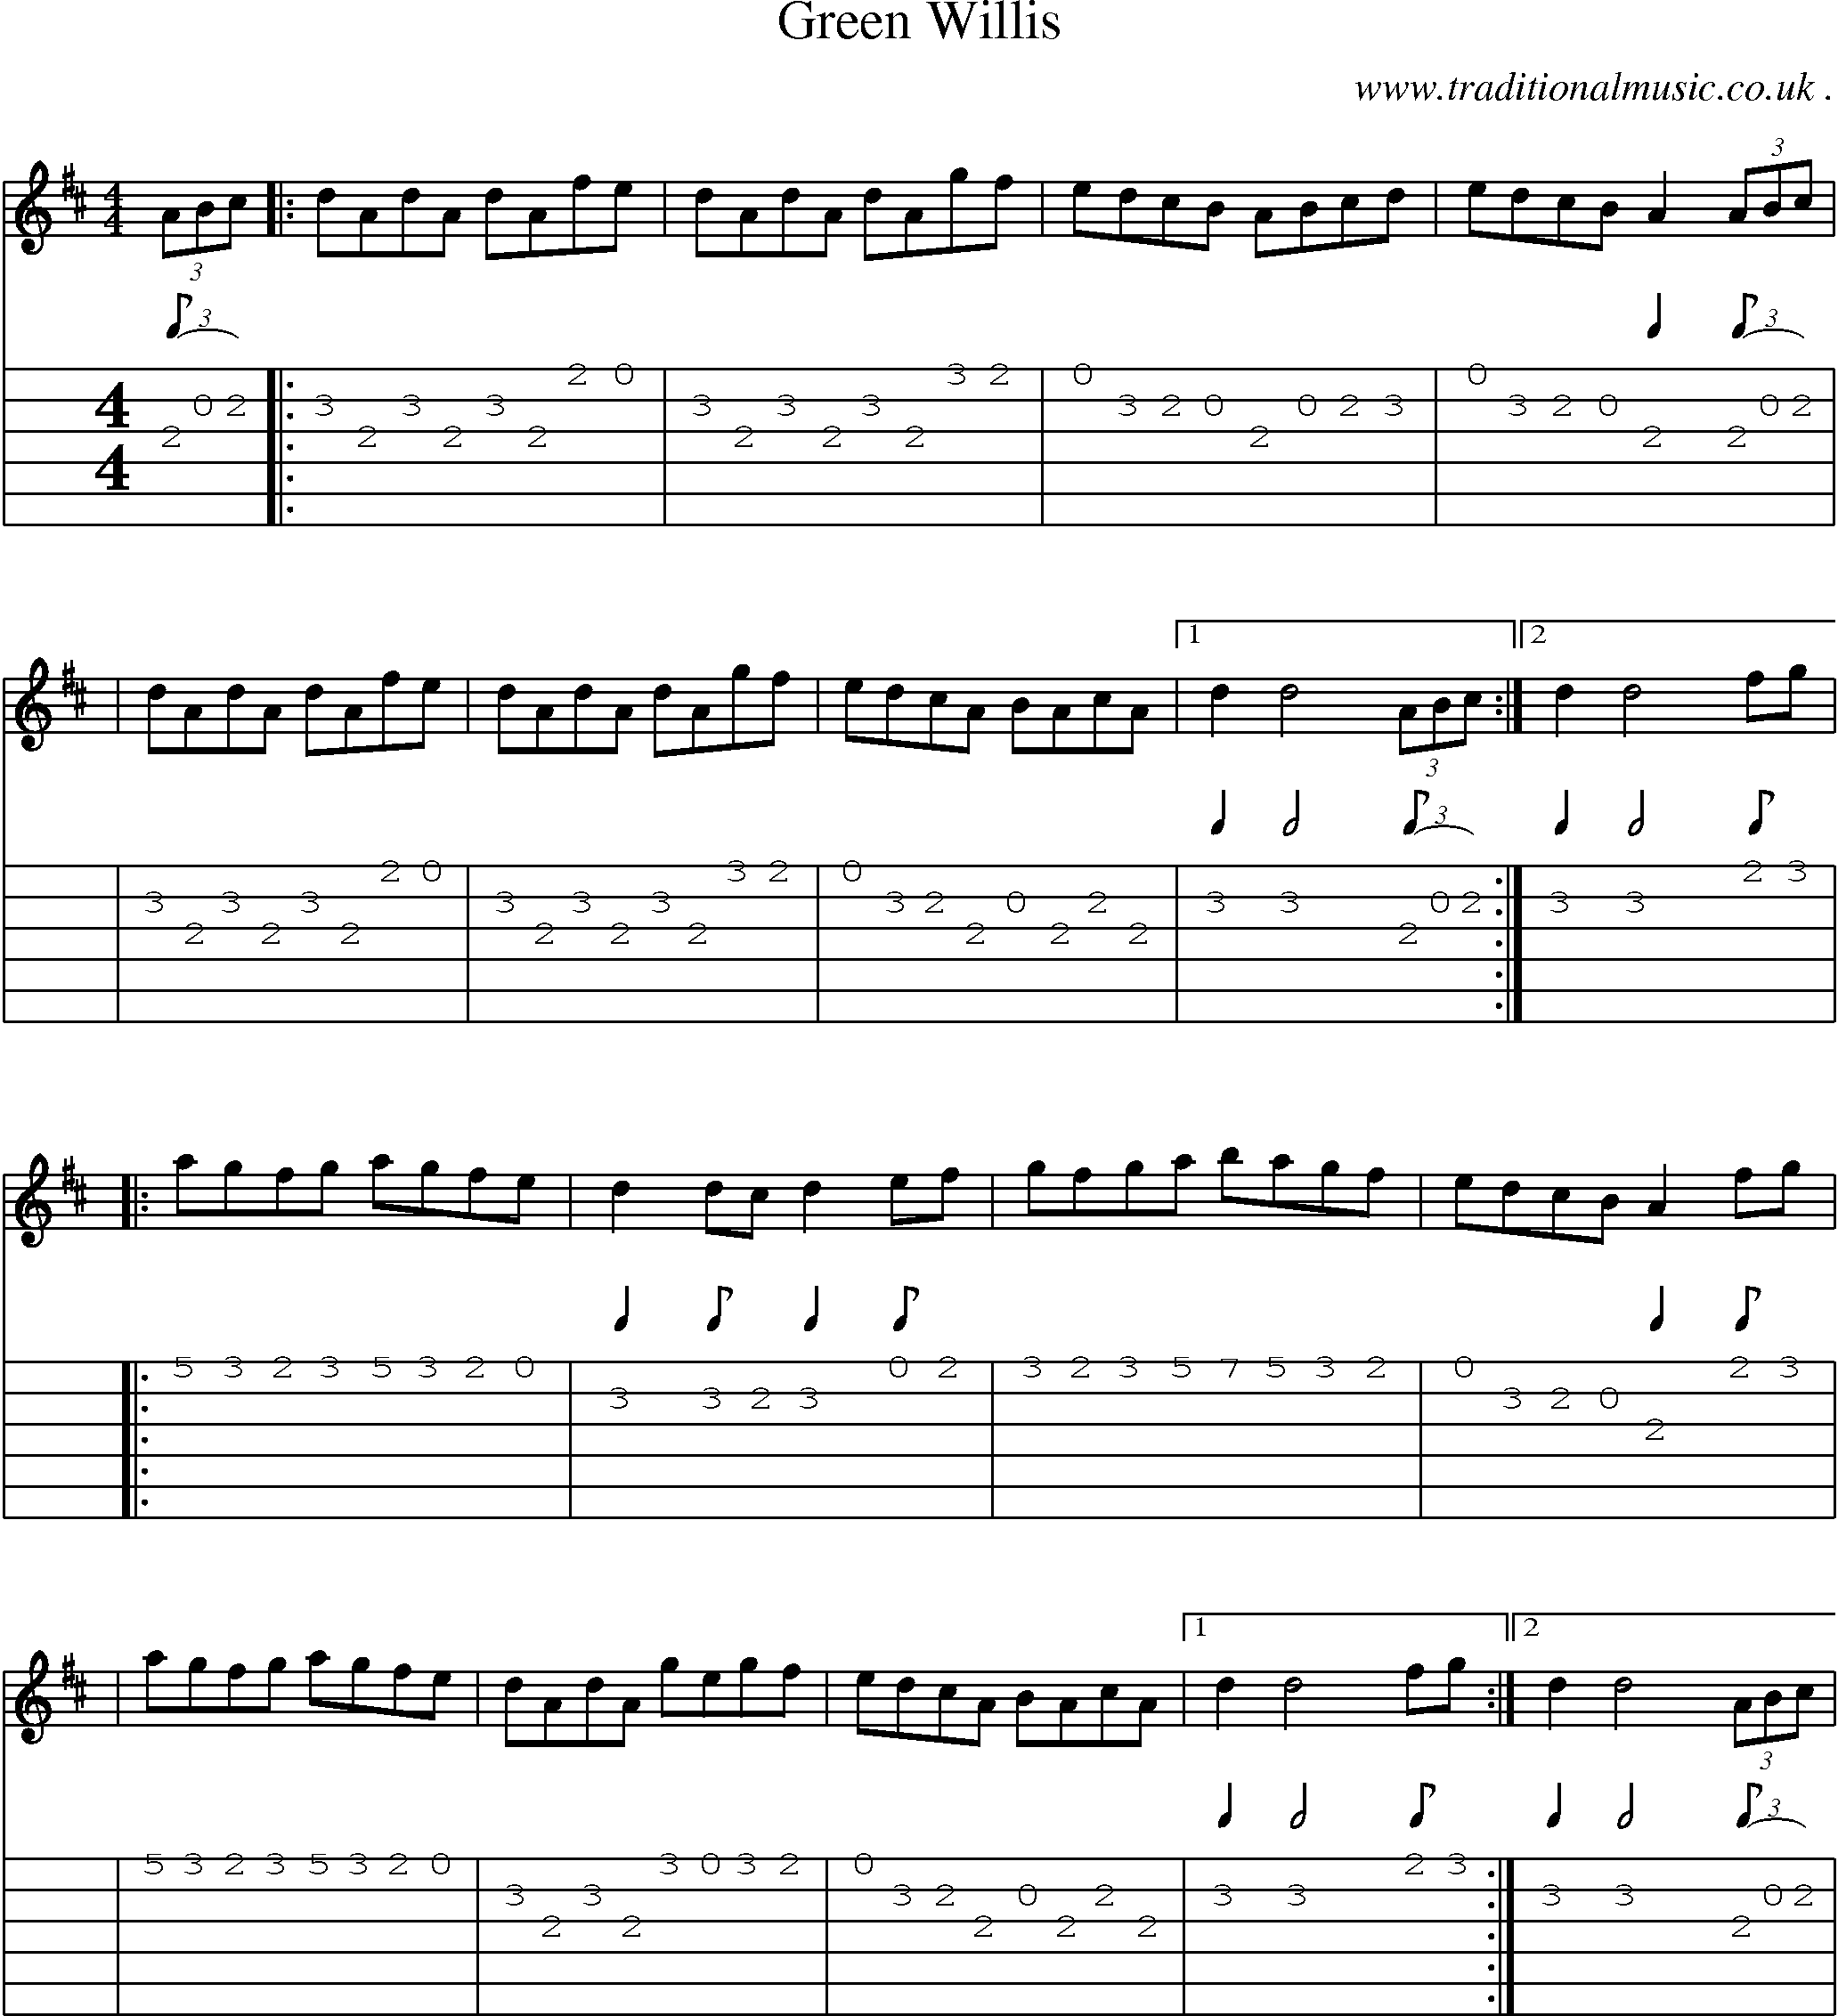 Sheet-Music and Guitar Tabs for Green Willis